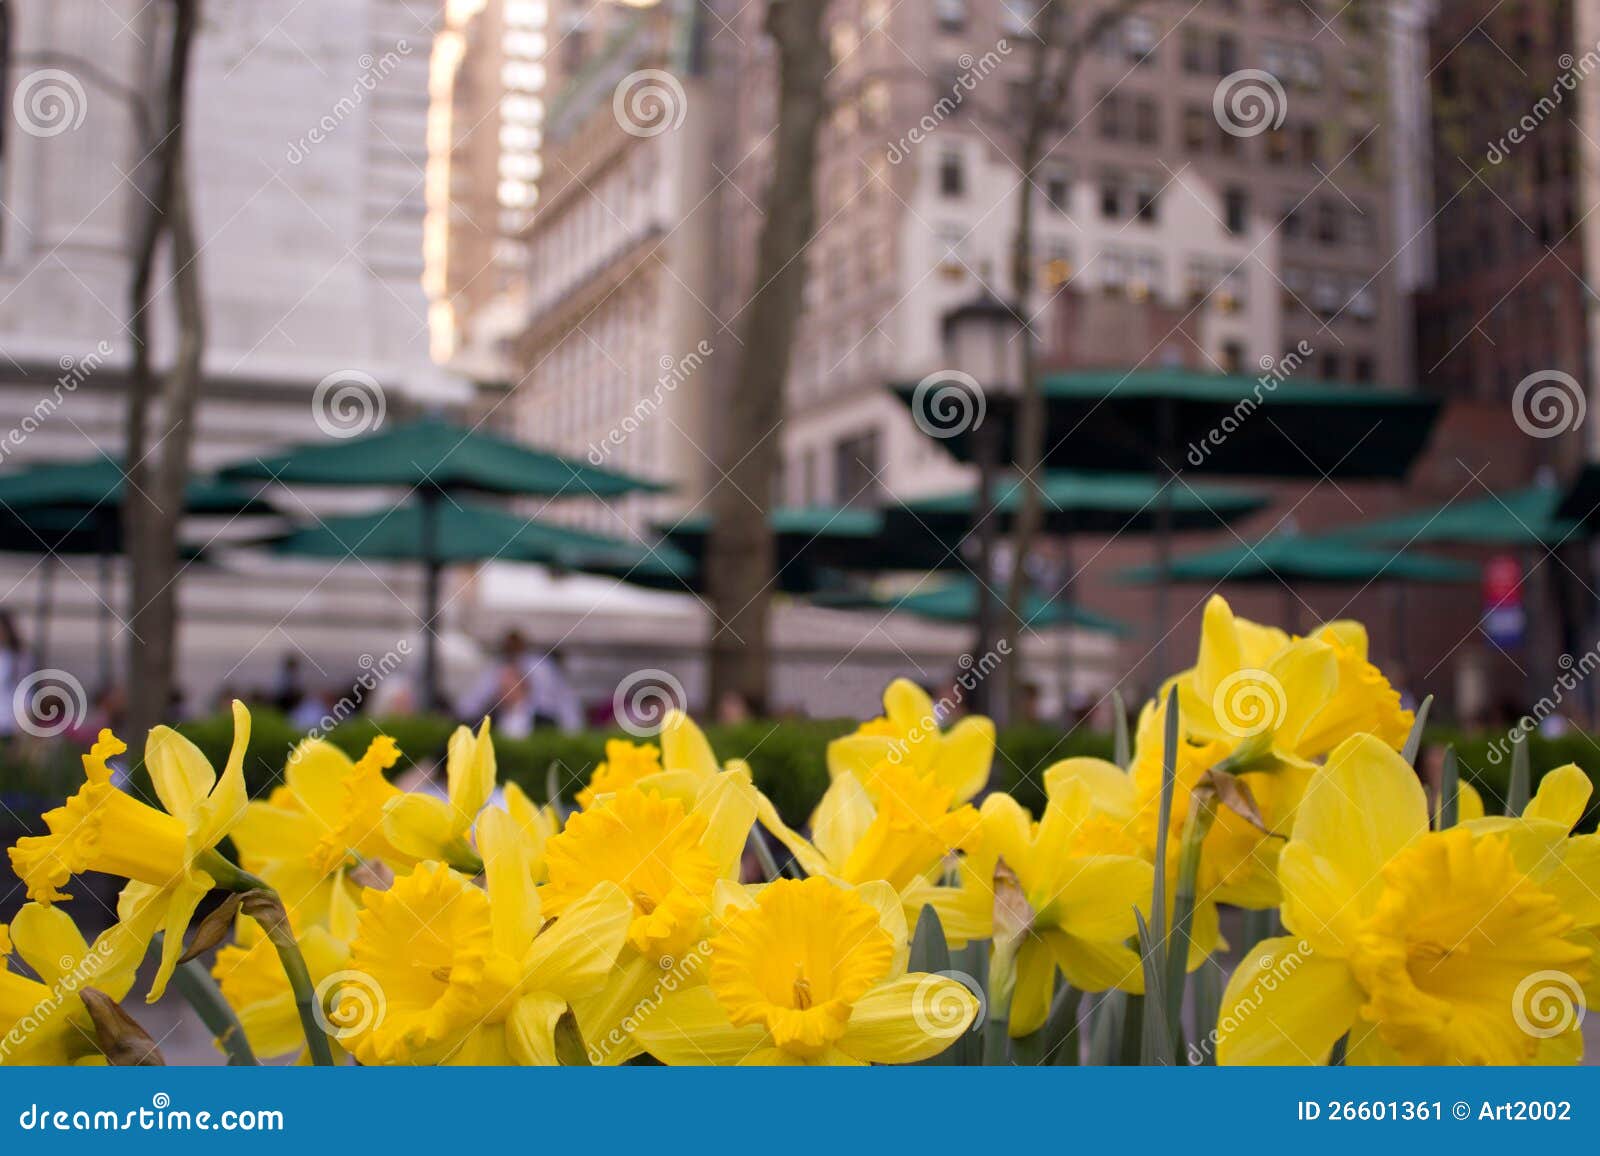 Yellow Daffodils, NYC stock image. Image of cafe, spring - 26601361